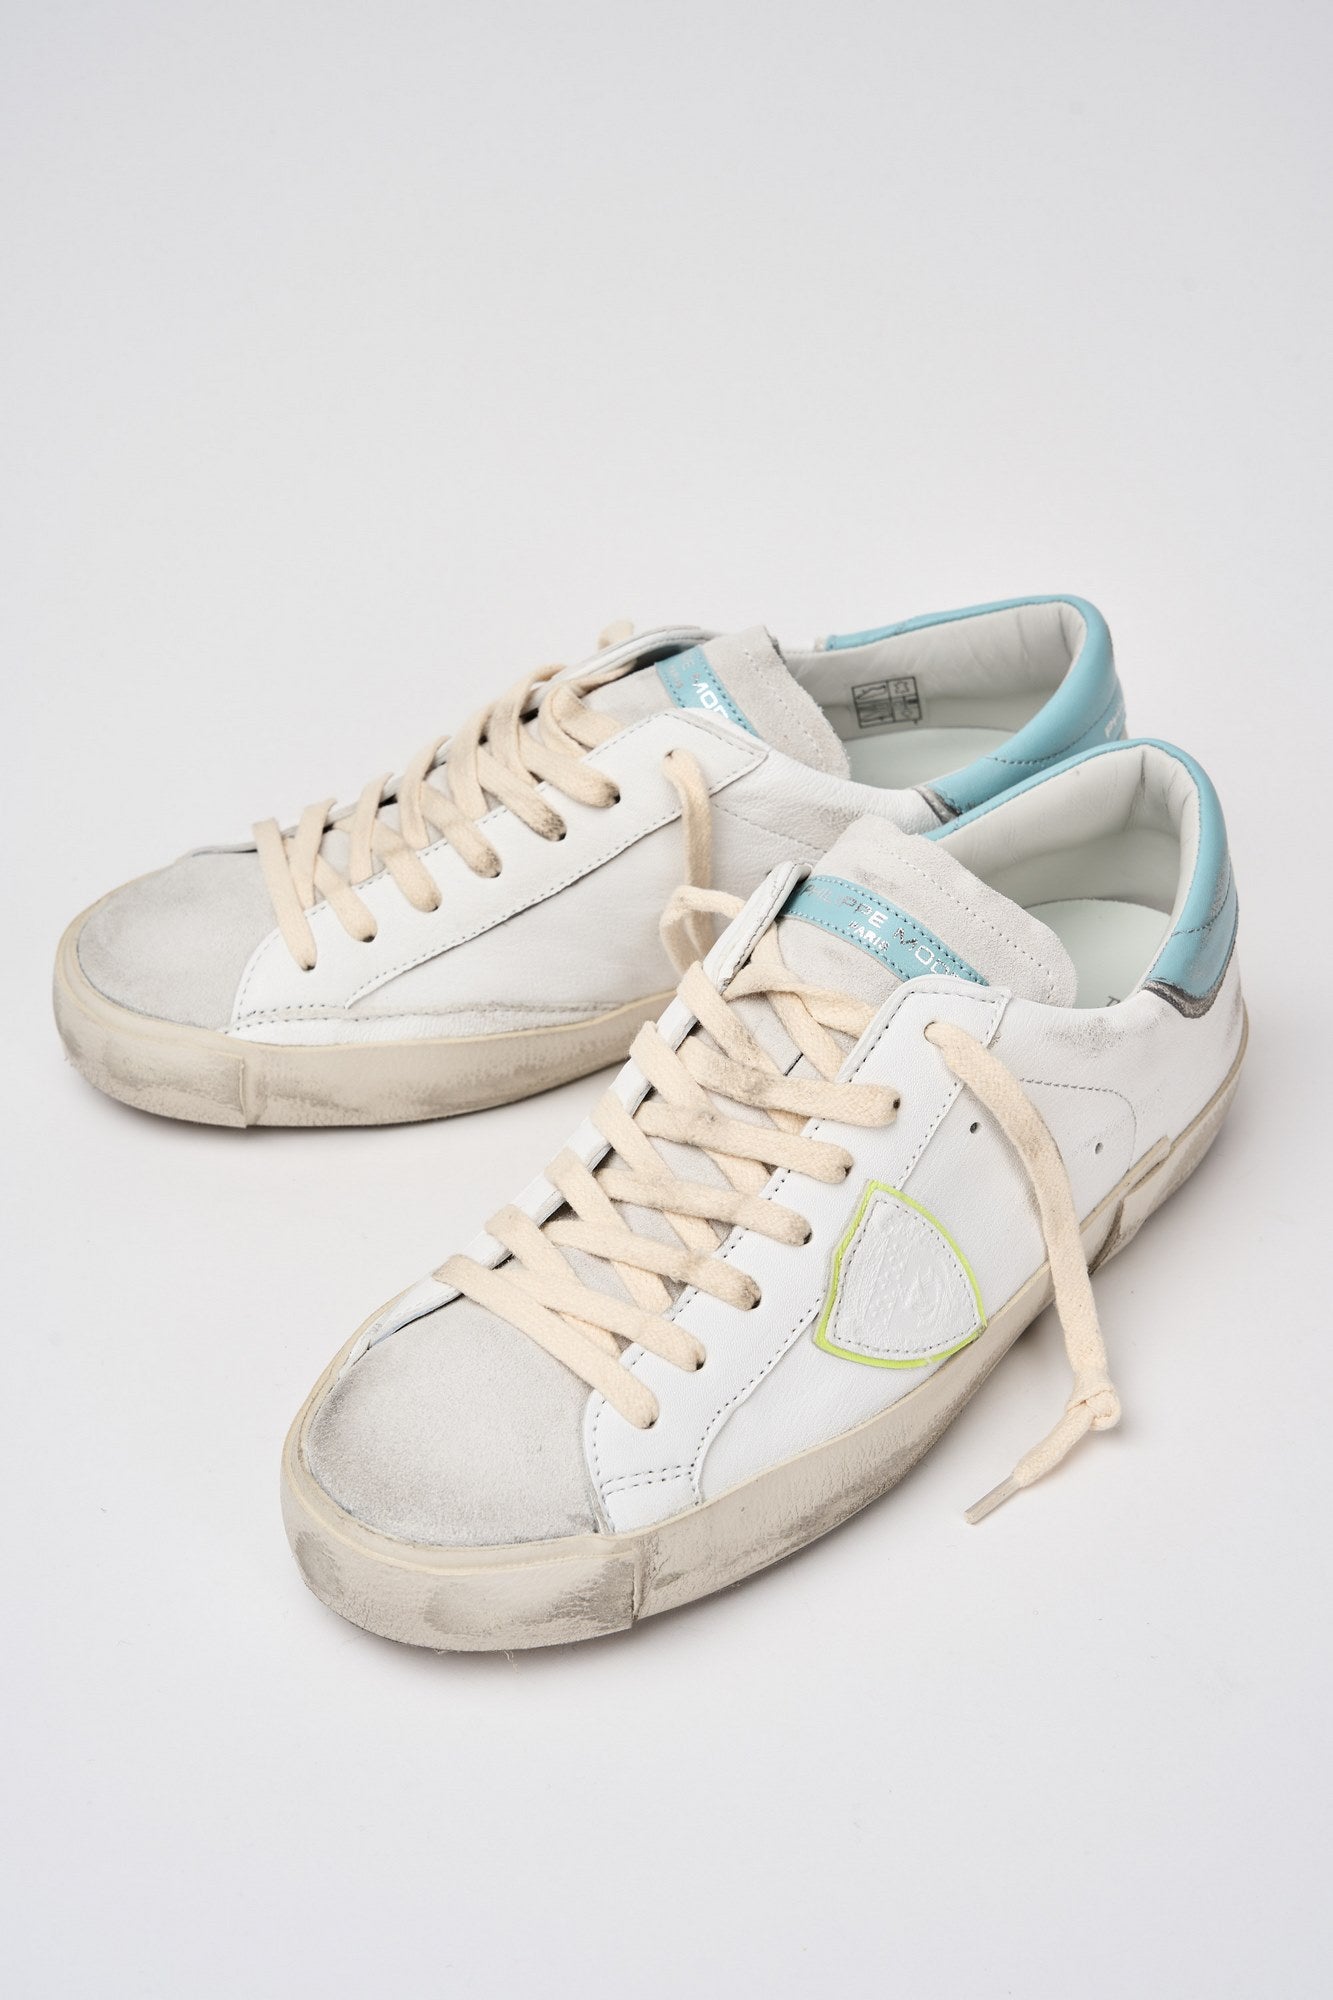 Philippe Model Sneakers Prsx Leather/Suede White/Sky Blue-7